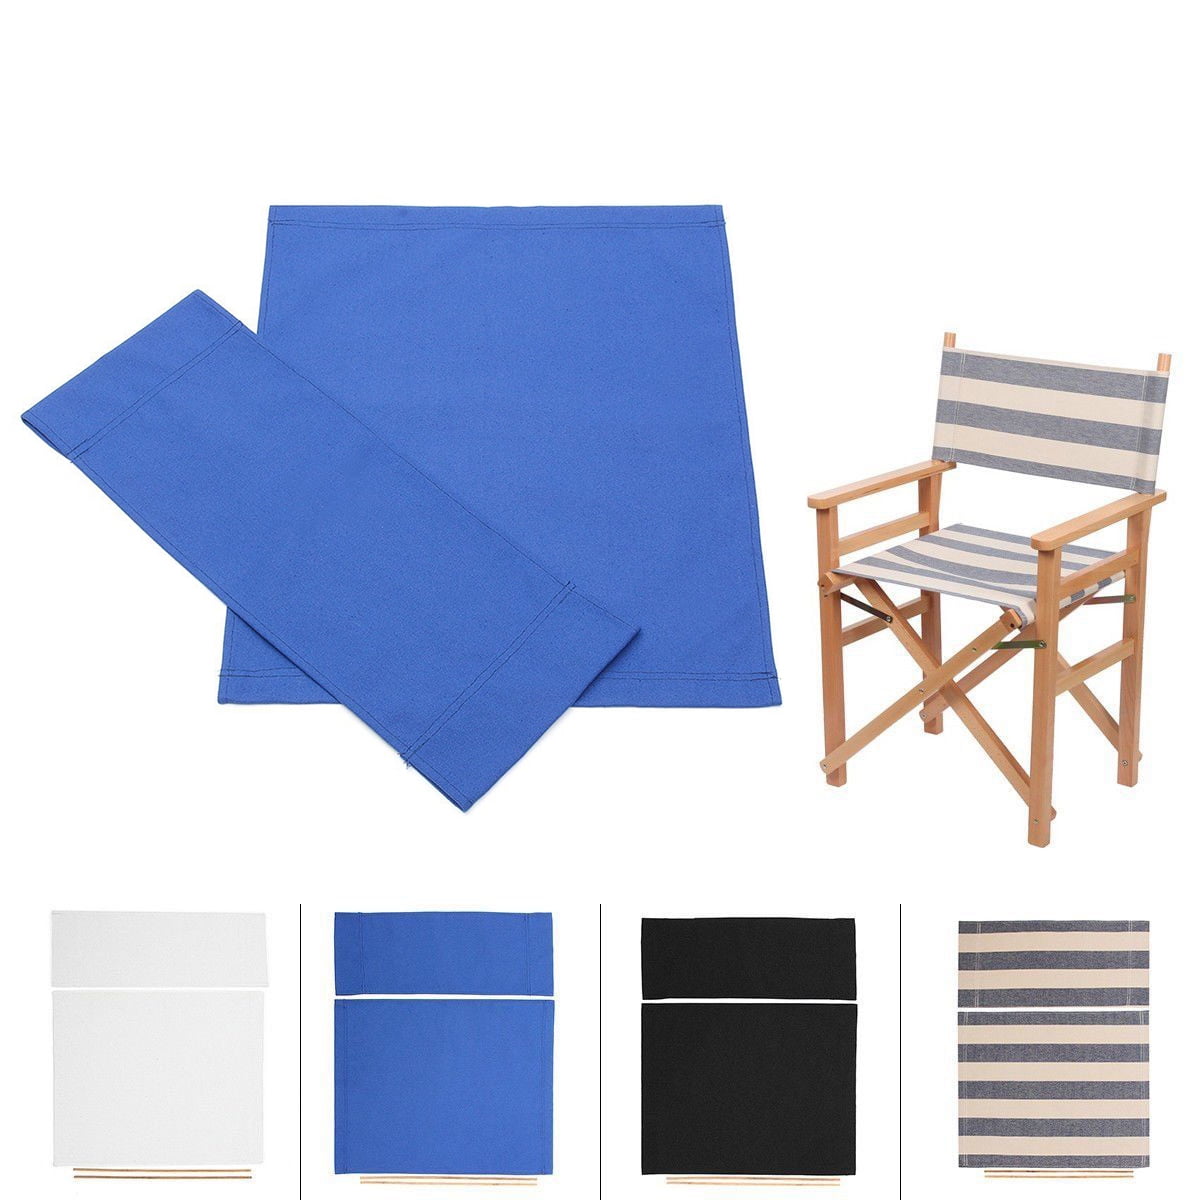 ACECITY Directors Chairs Folding Chairs Cover Kit Stool Protector Replacement Portable Directors Chairs Club Chairs Canvas Seat Covers for Garden Indoor and Outdoor 